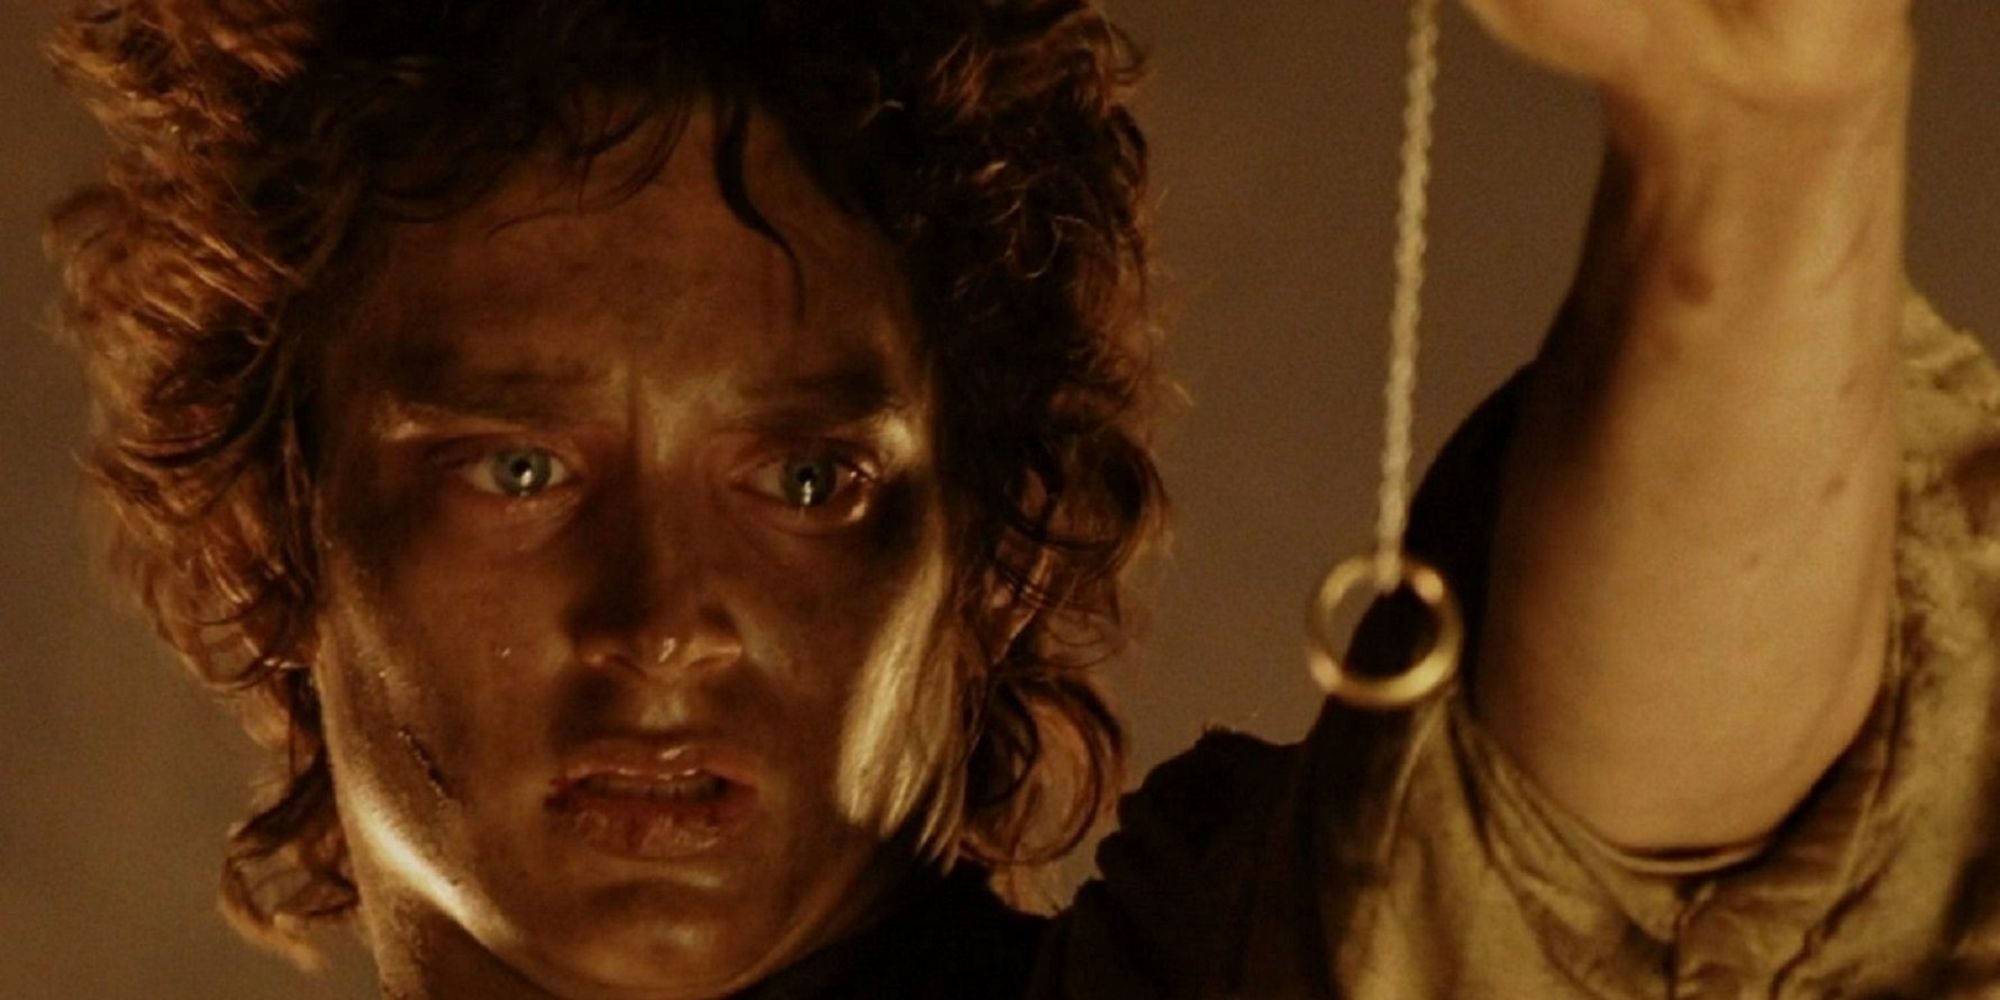 Elijah Wood covered in dirt and soot as Frodo, gazing longingly at the One Ring.